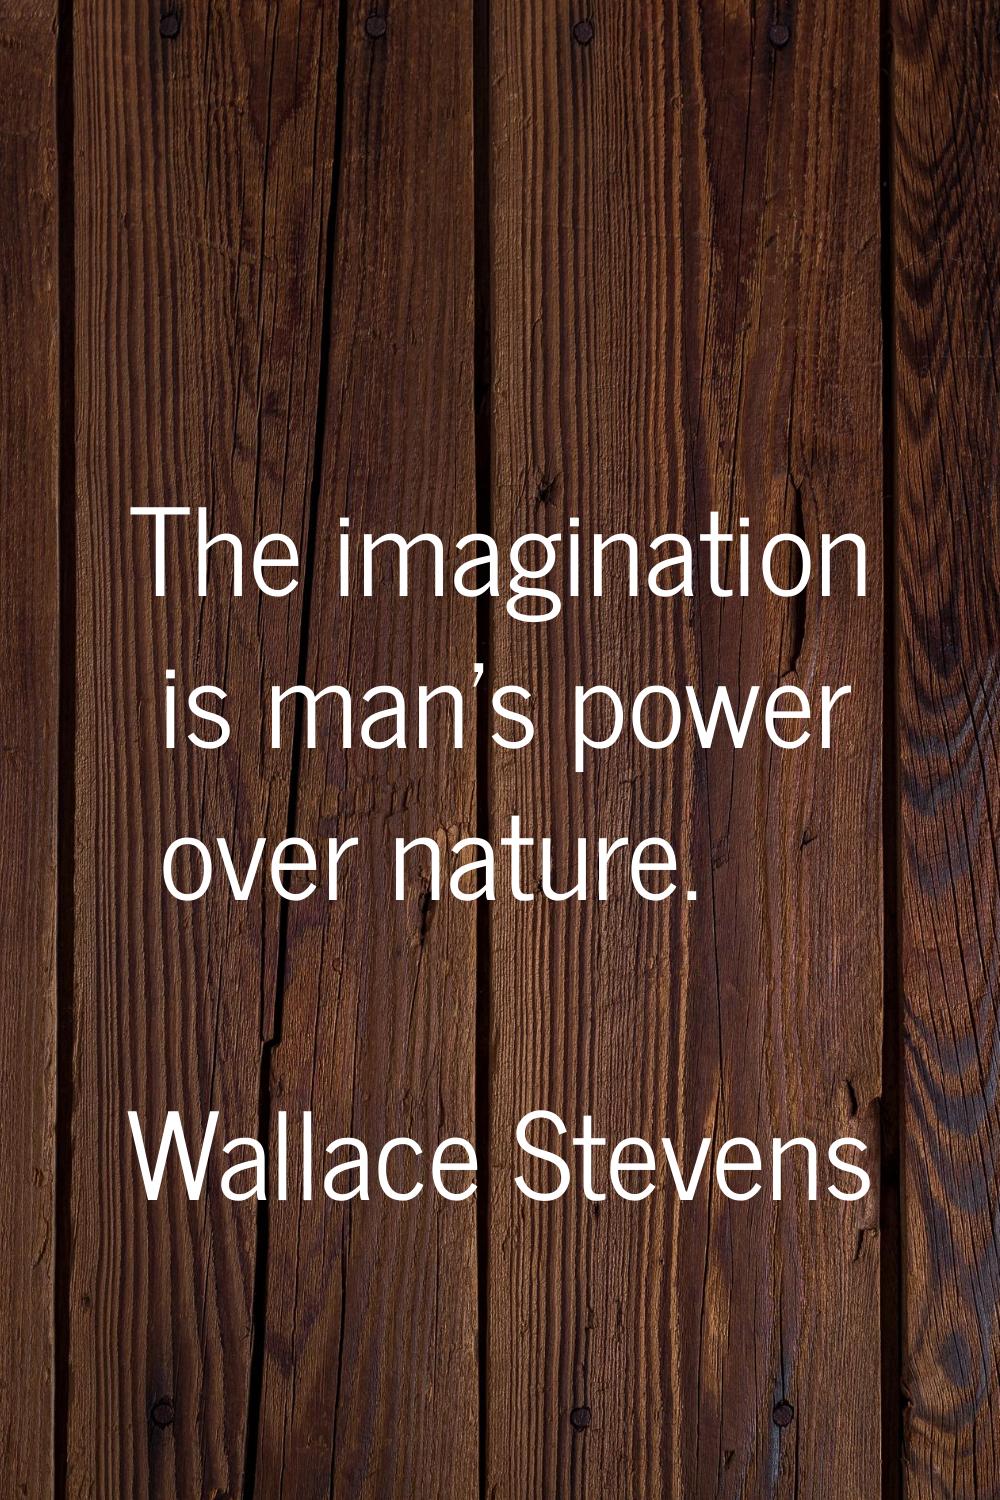 The imagination is man's power over nature.